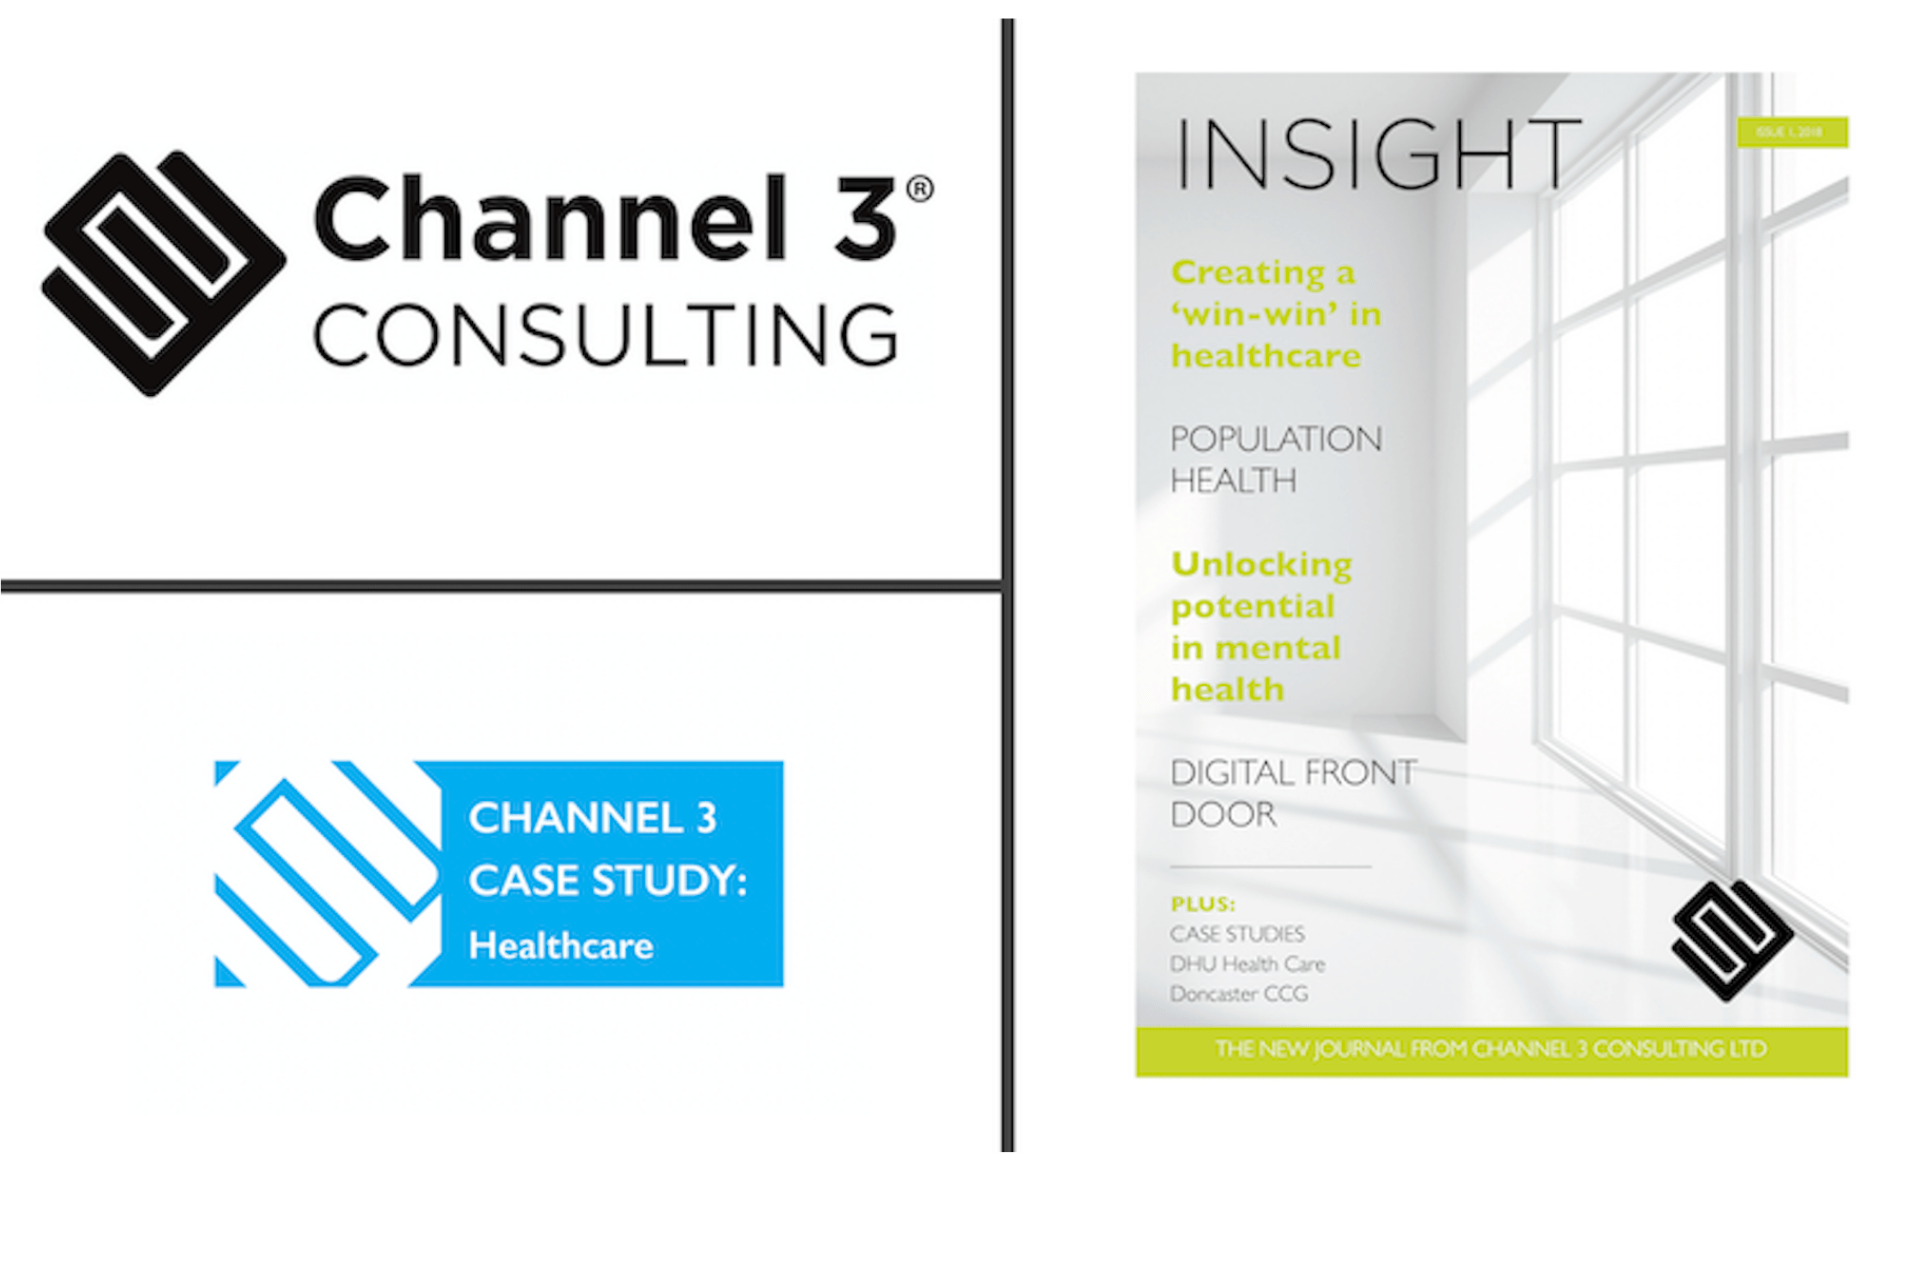 Case study: Channel 3 Consulting